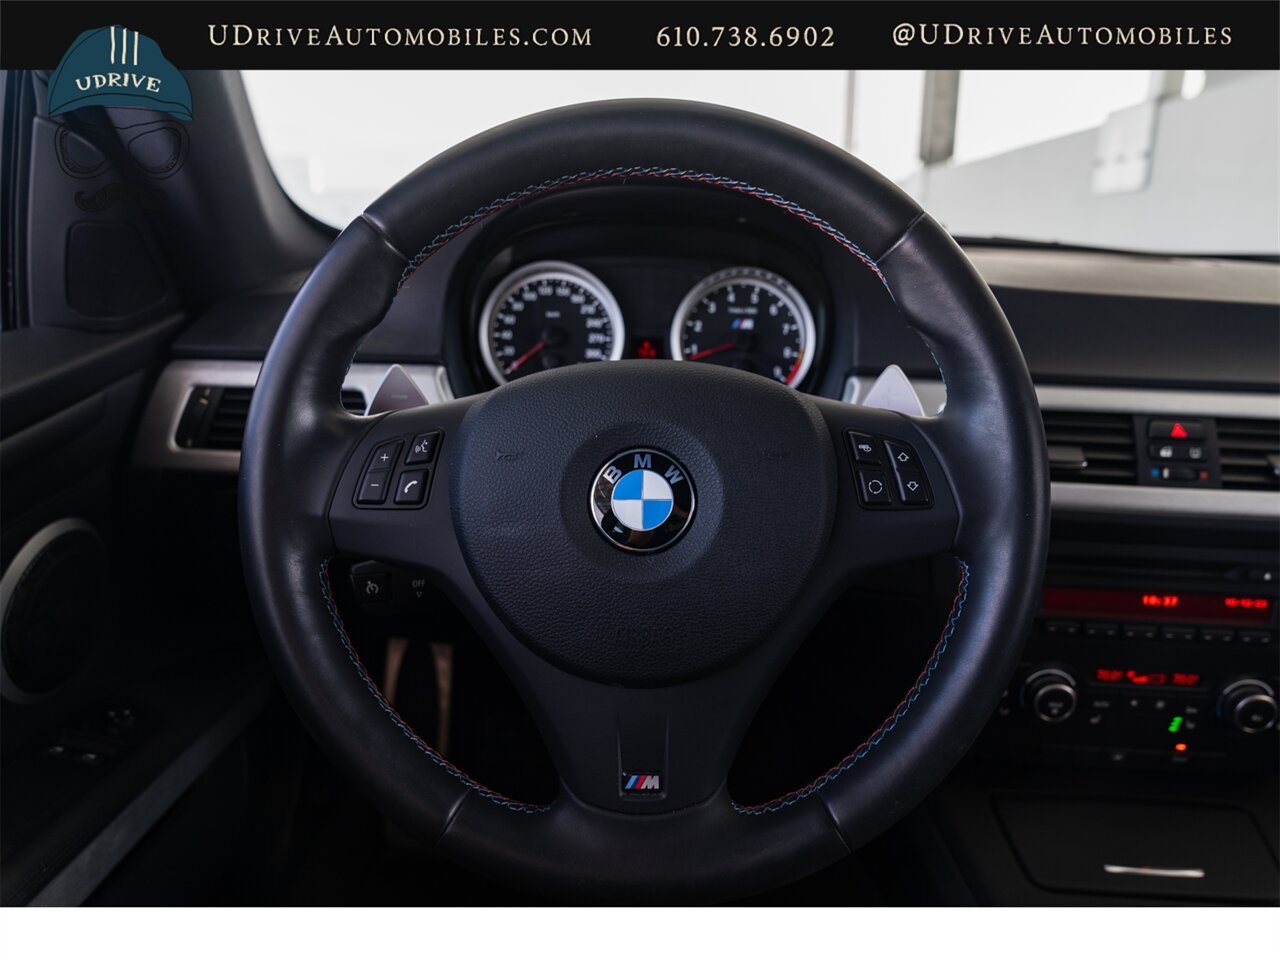 2011 BMW M3  No Nav Carbon Roof Comf Acc 19in Whls 11k Miles - Photo 35 - West Chester, PA 19382